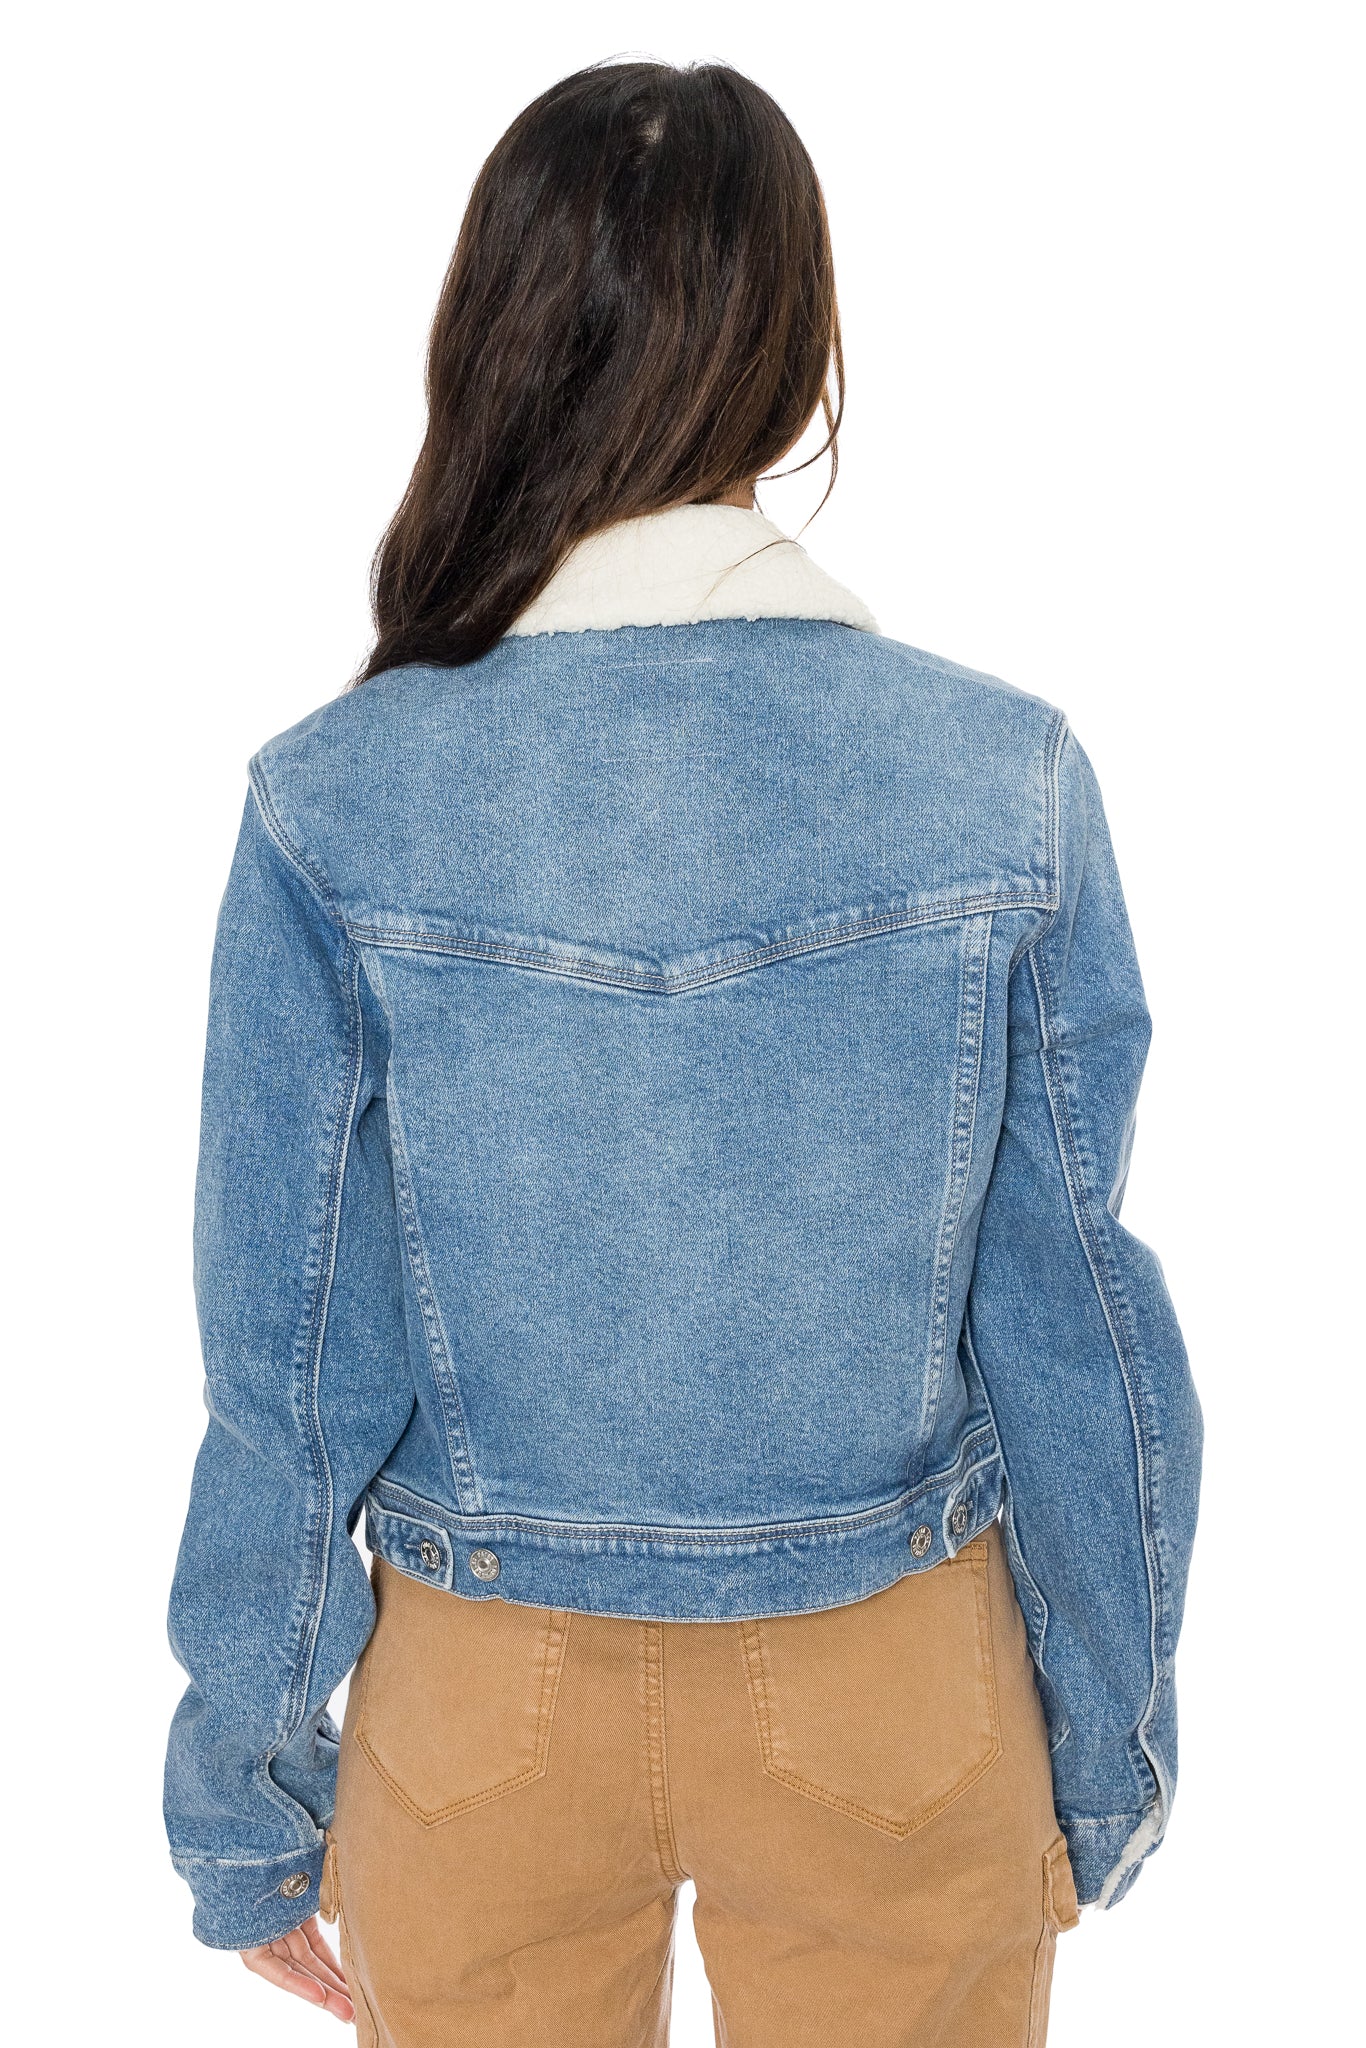 Relaxed Vivienne Jacket in Valerie Distressed